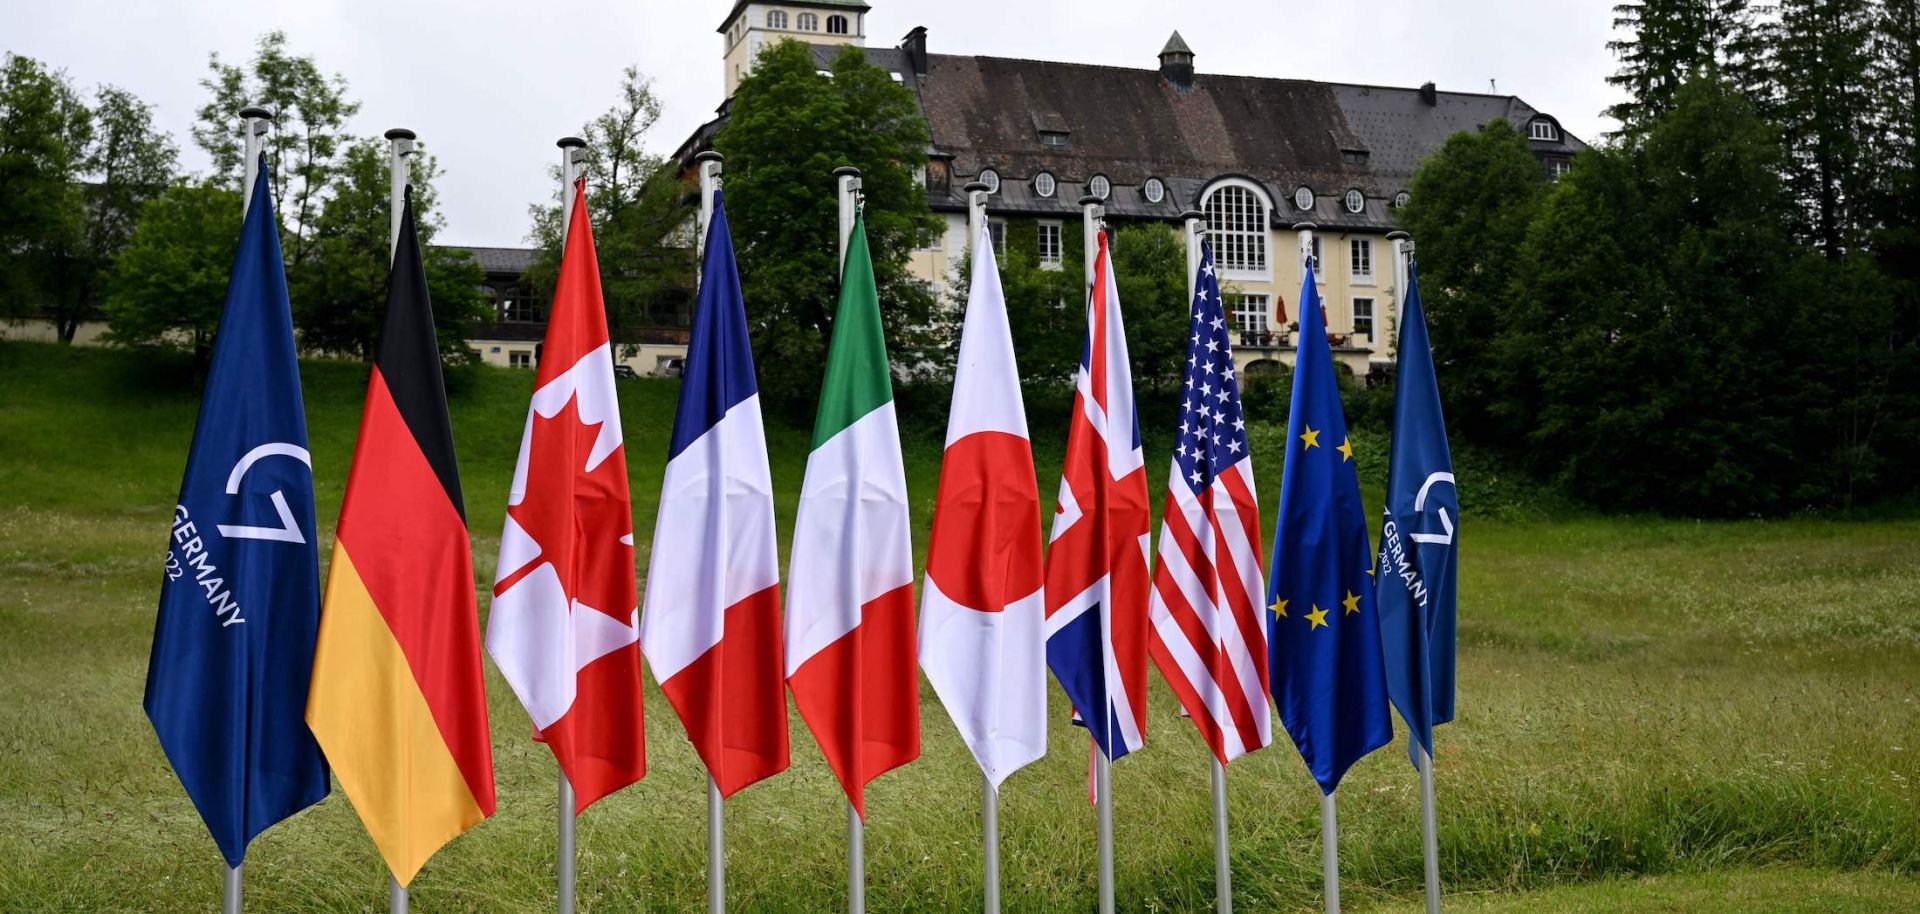 The flags of the G-7 countries and the European Union are seen on June 28, 2022, in front of Elmau Castle in southern Germany during this year's G-7 Summit.